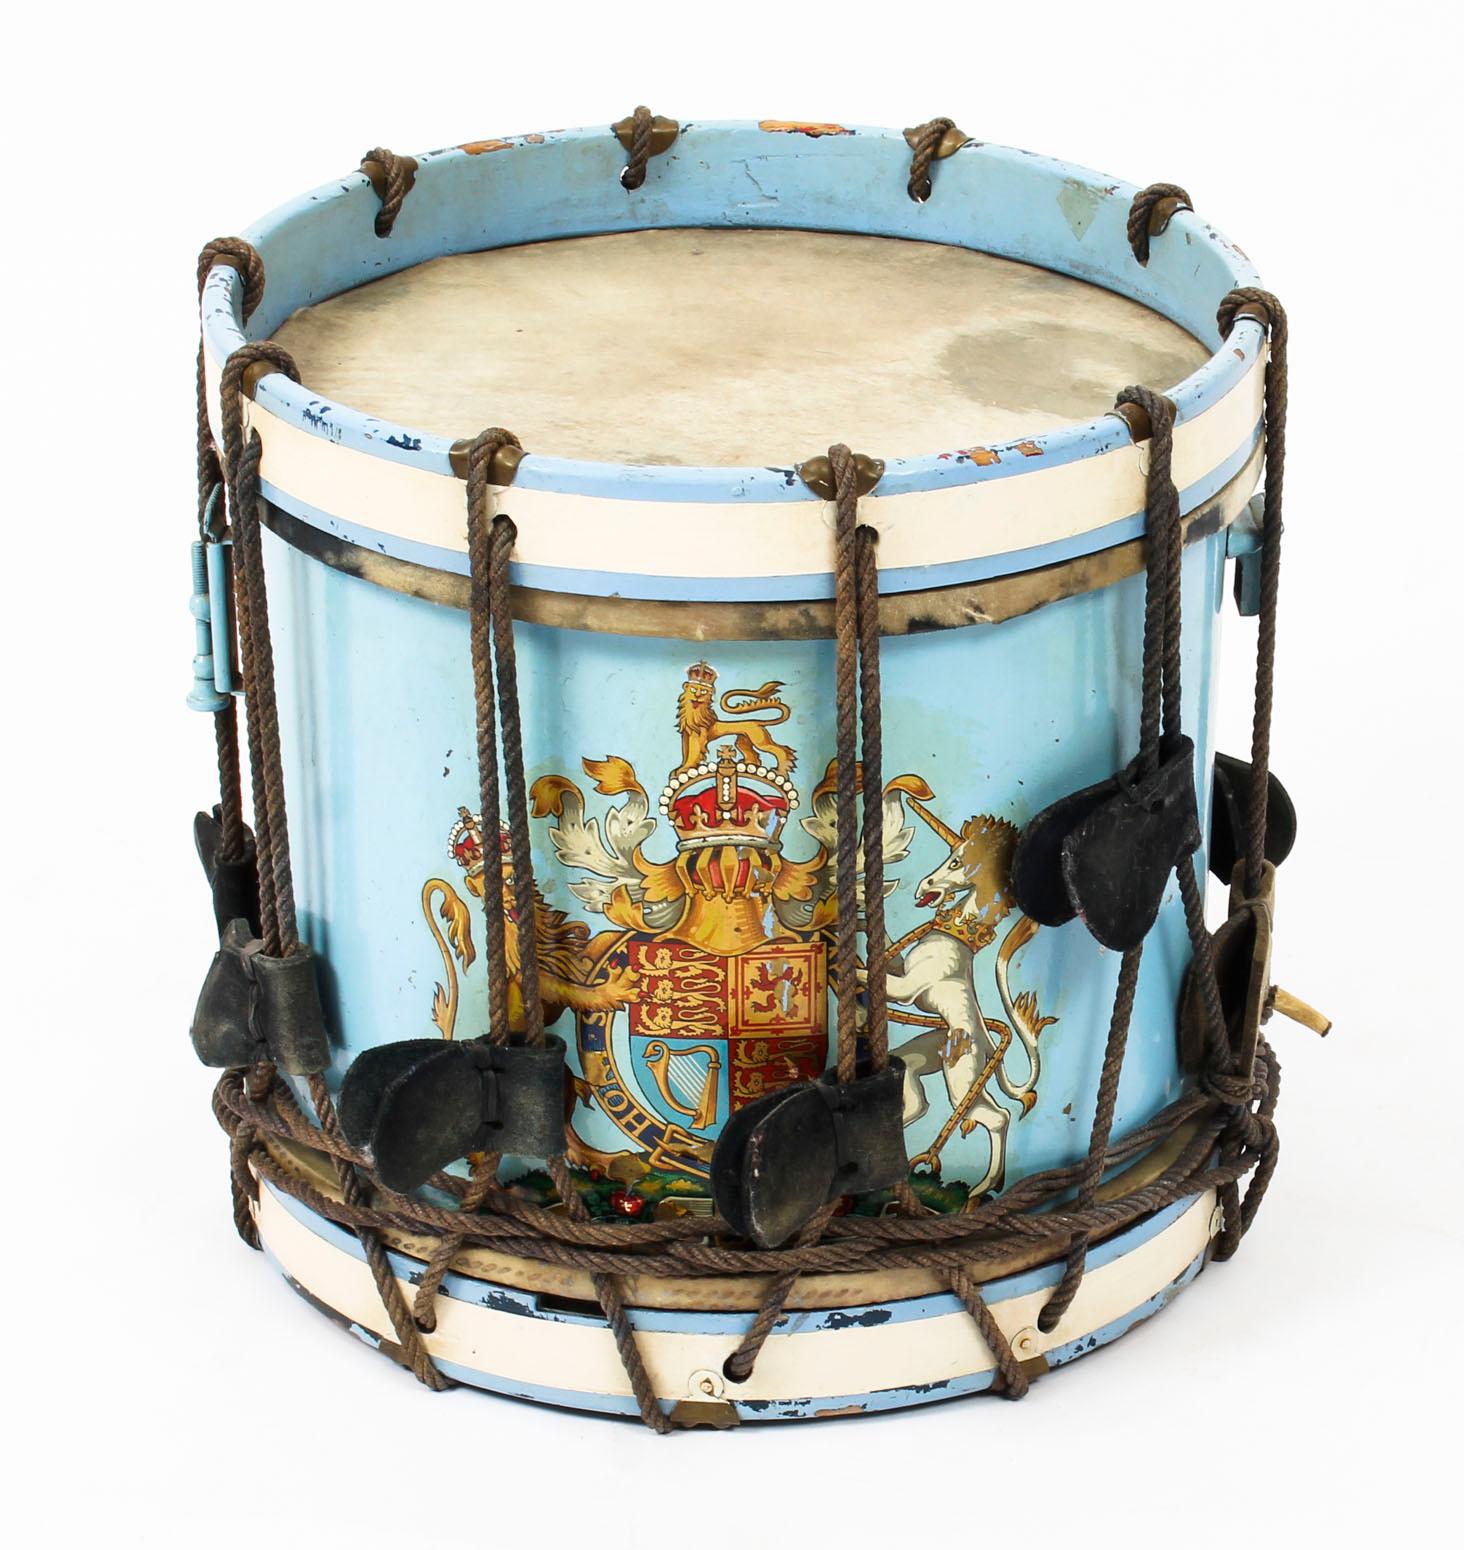 Antique Military Drum with British Royal Coat of Arms, Late 19th Century 6